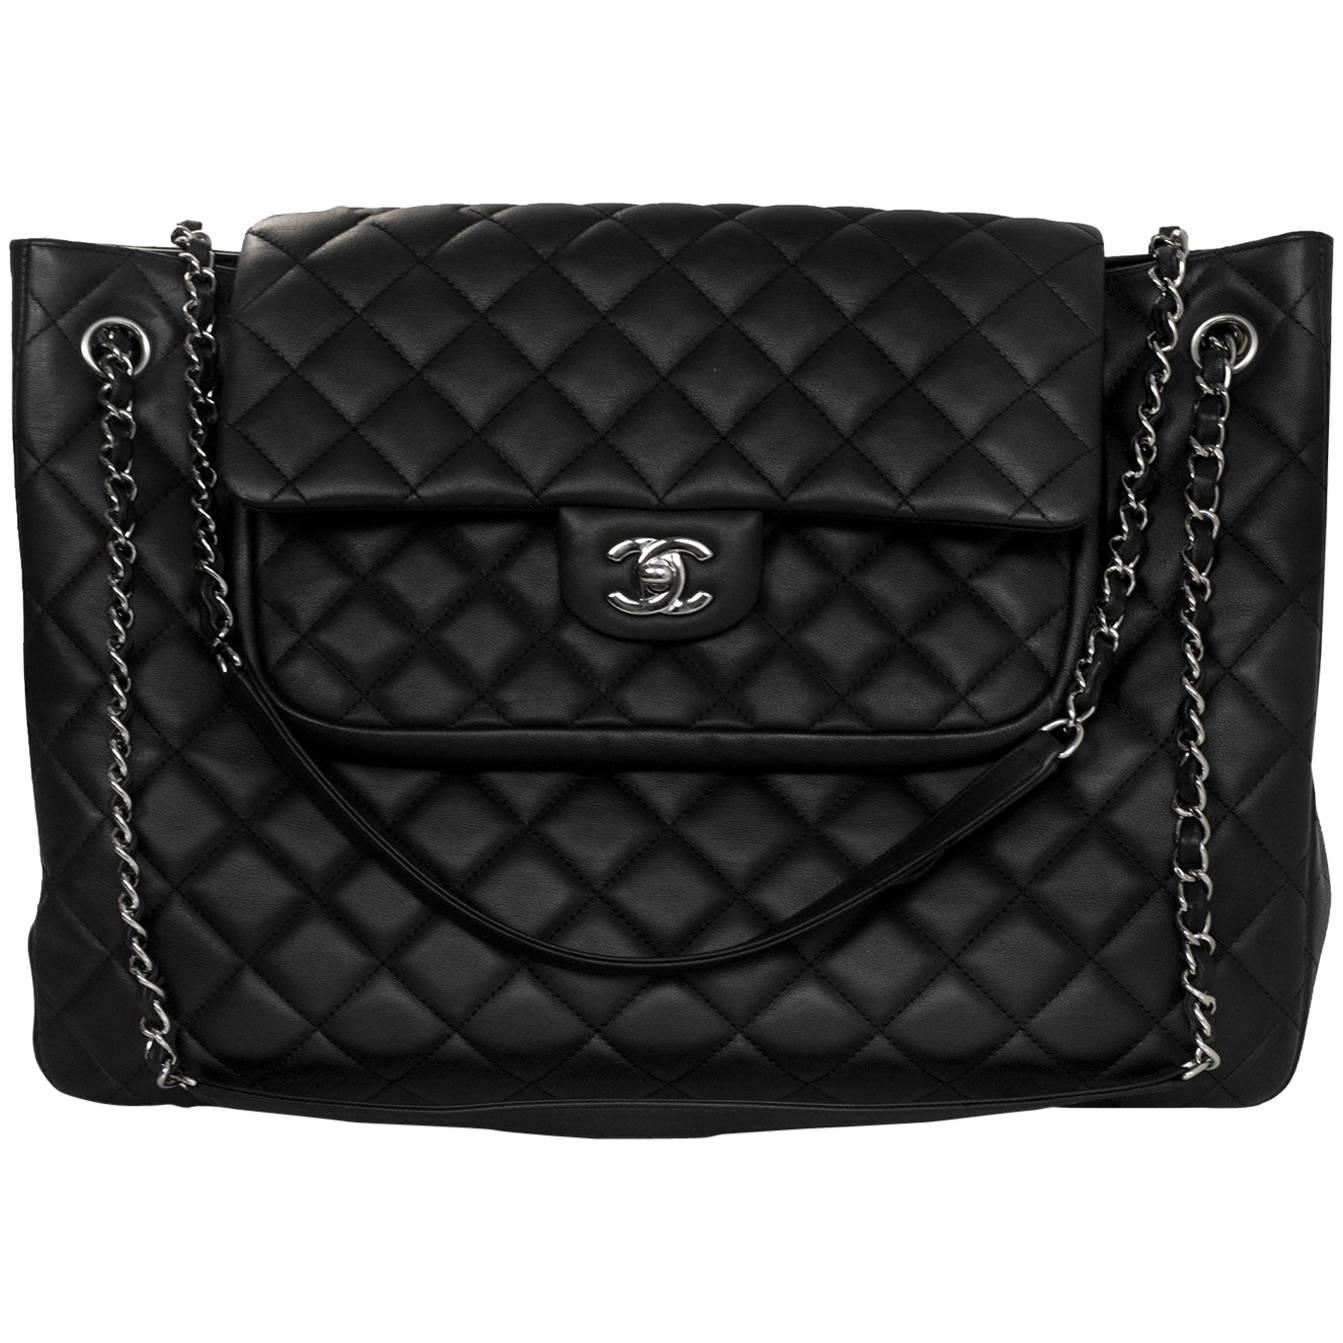 Chanel Black Quilted Leather Flap Large Shopping Tote Bag rt. $5, 500